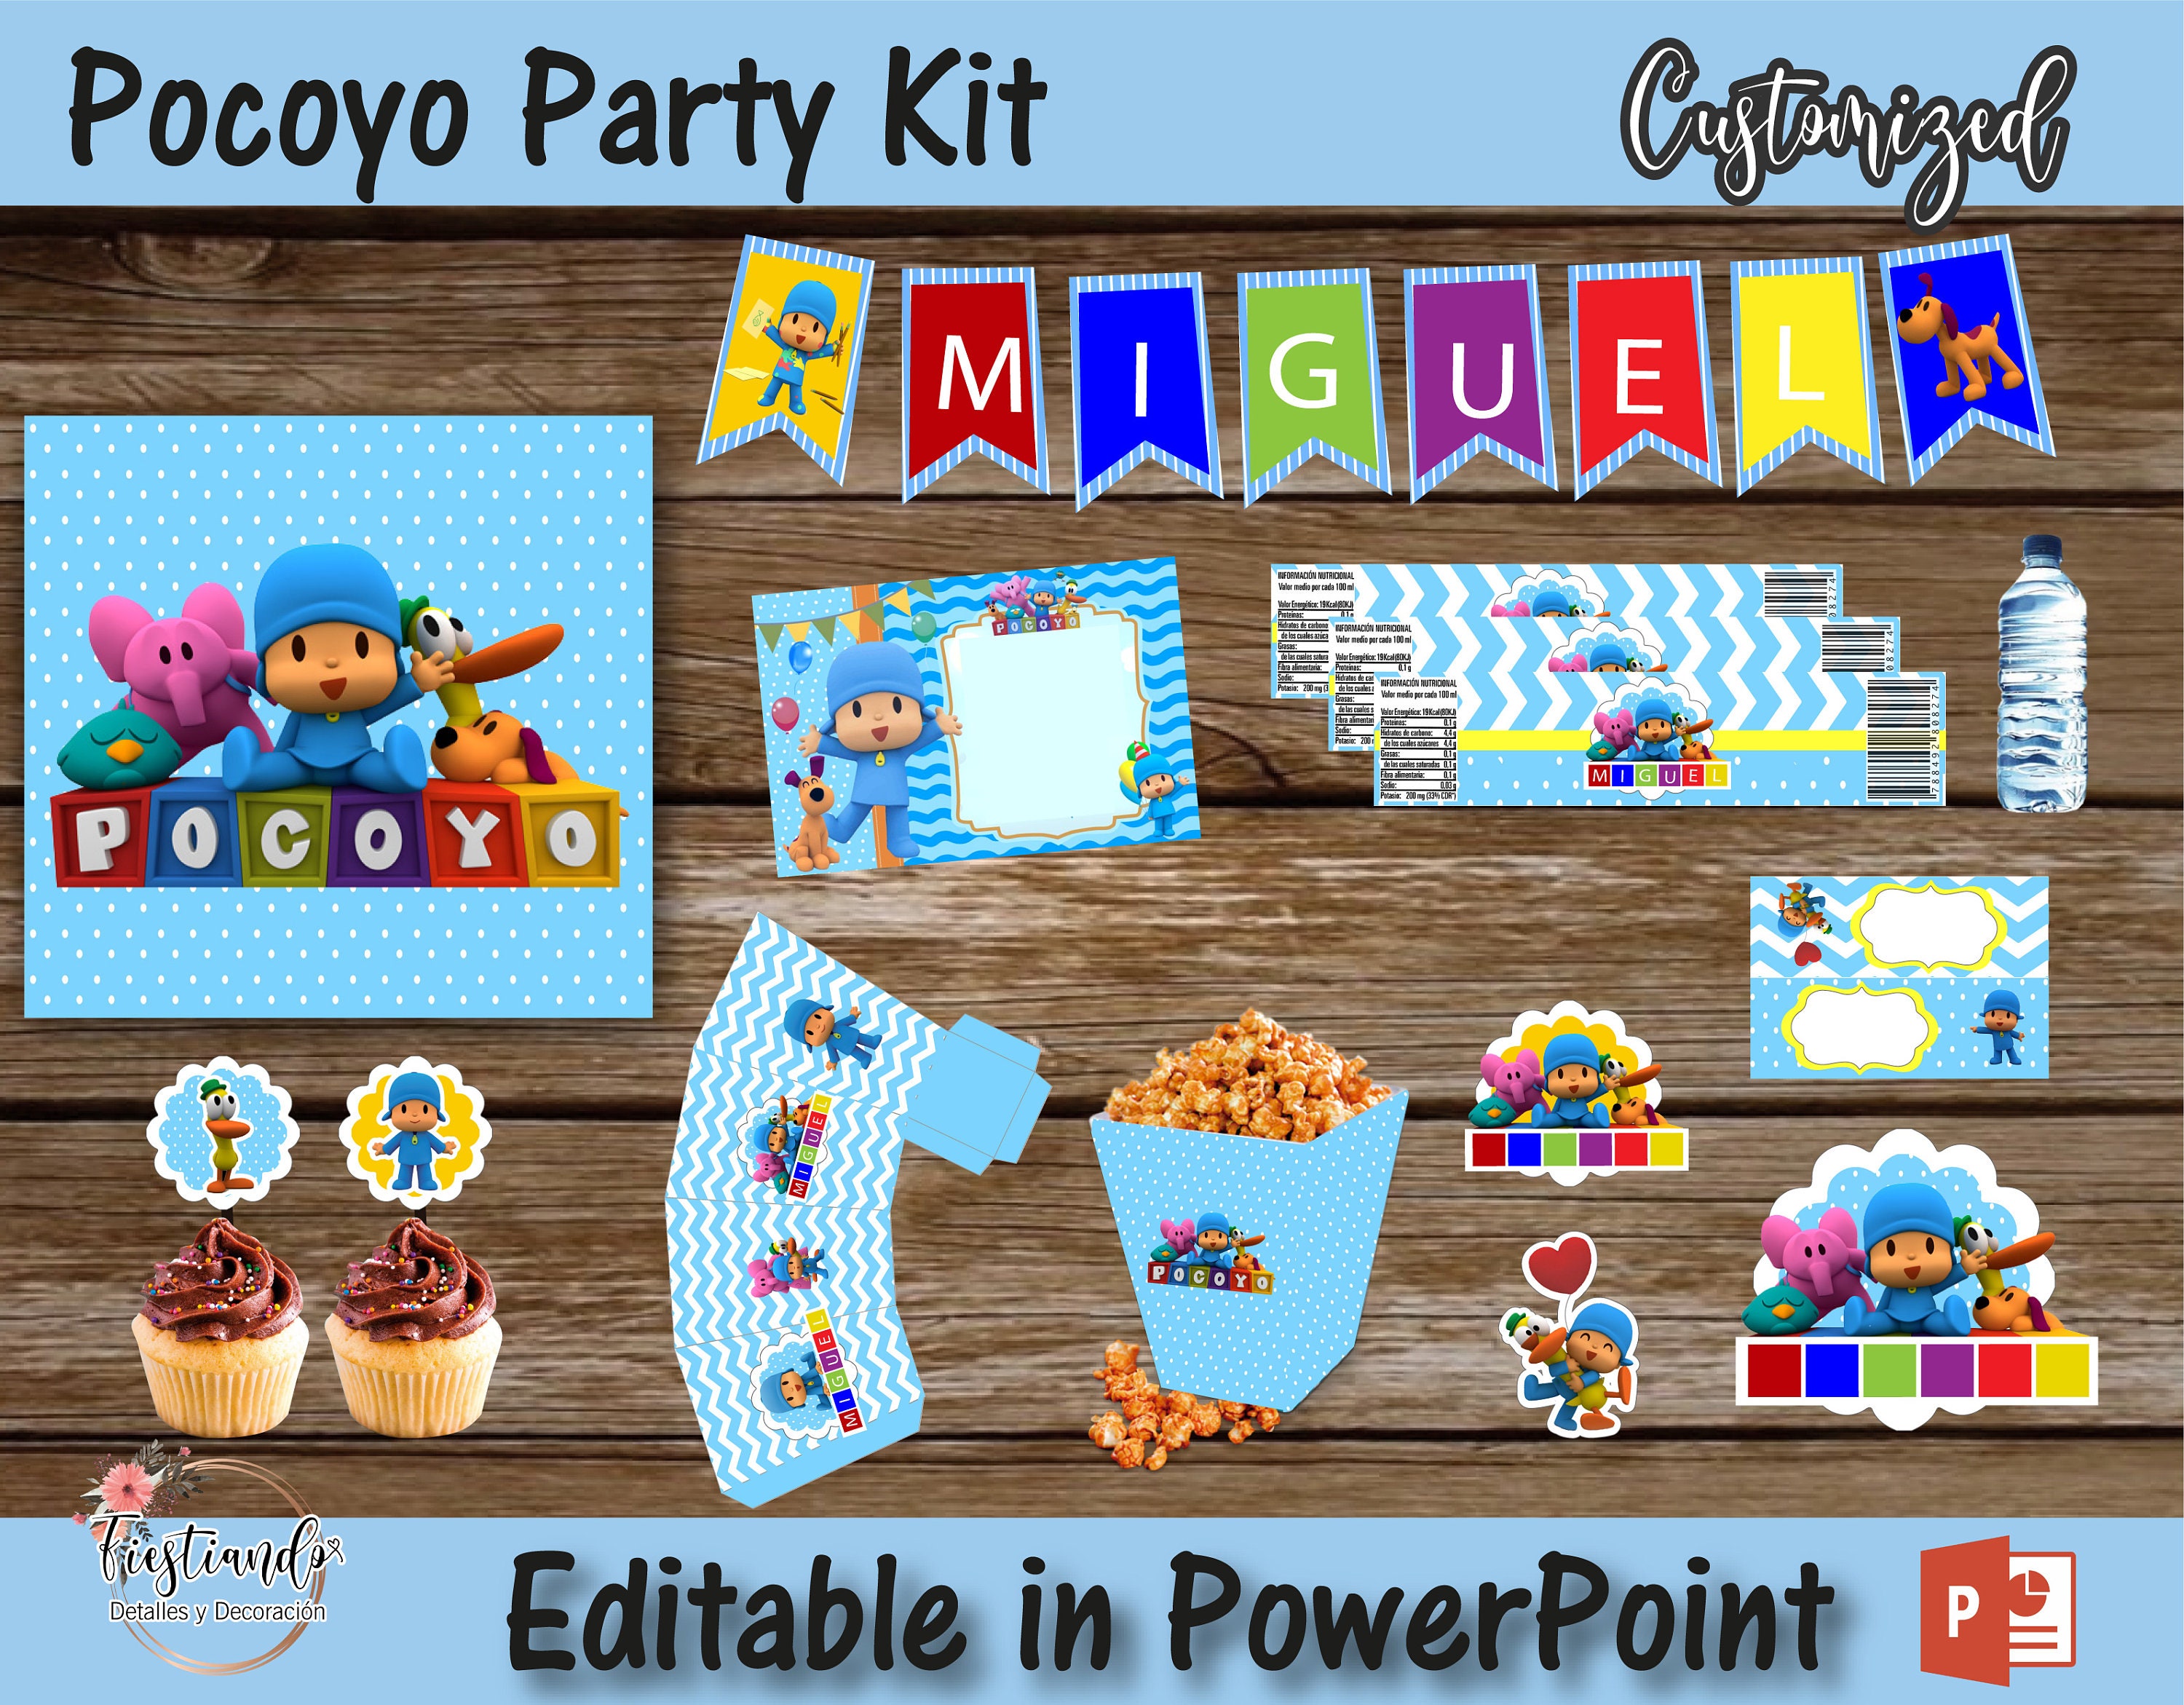 Drawings To Paint & Colour Pocoyo - Print Design 010